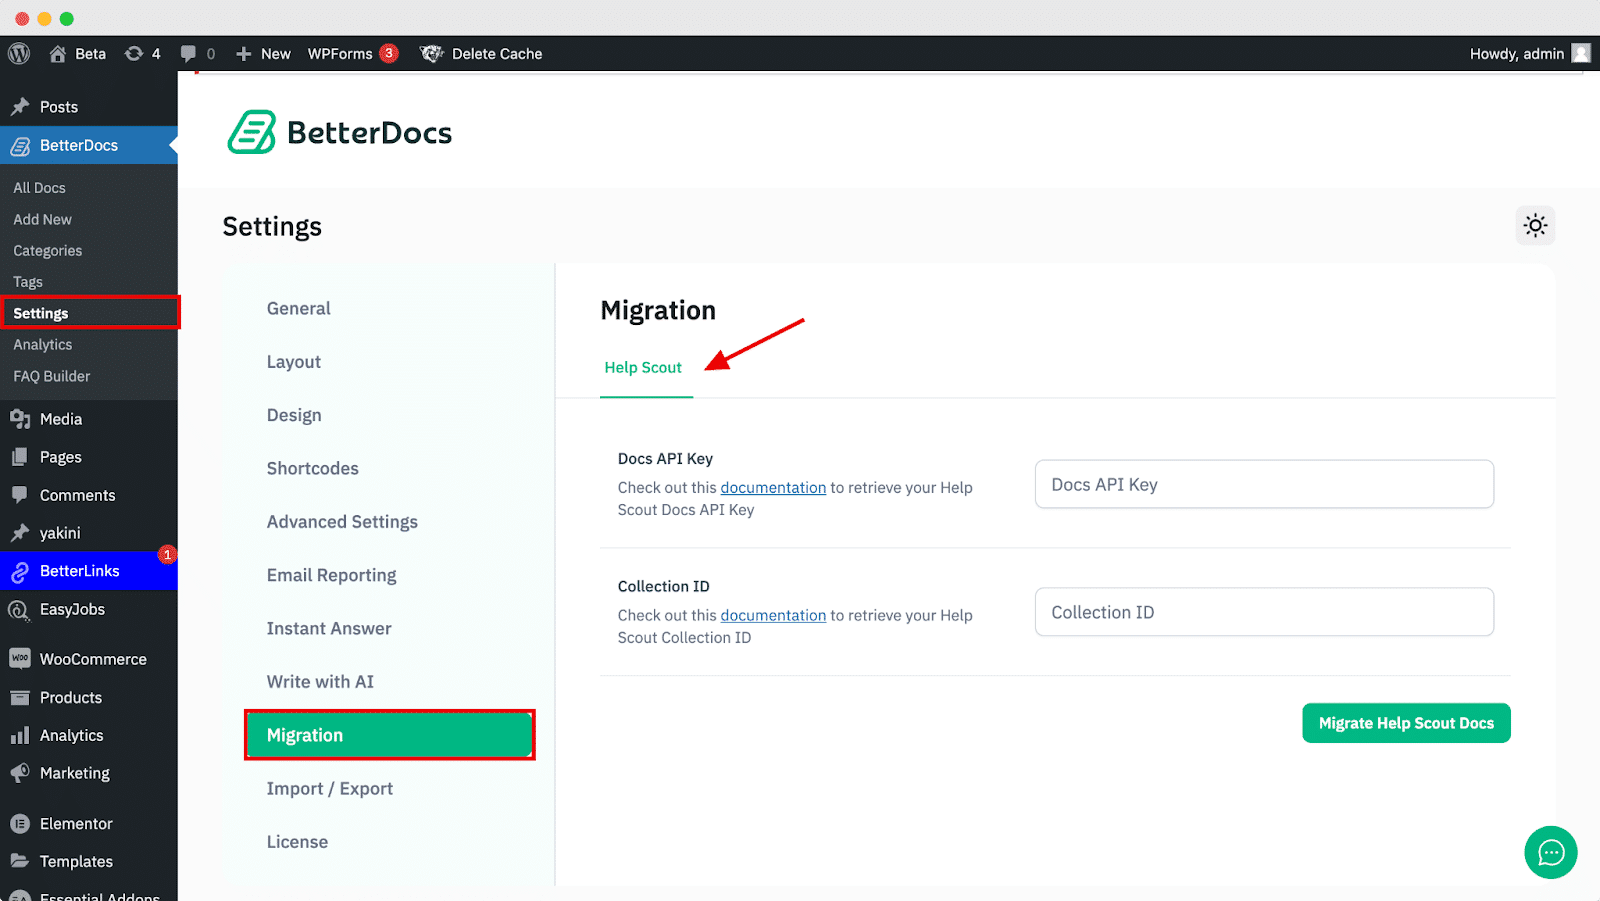 Migrate to BetterDocs from Help Scout